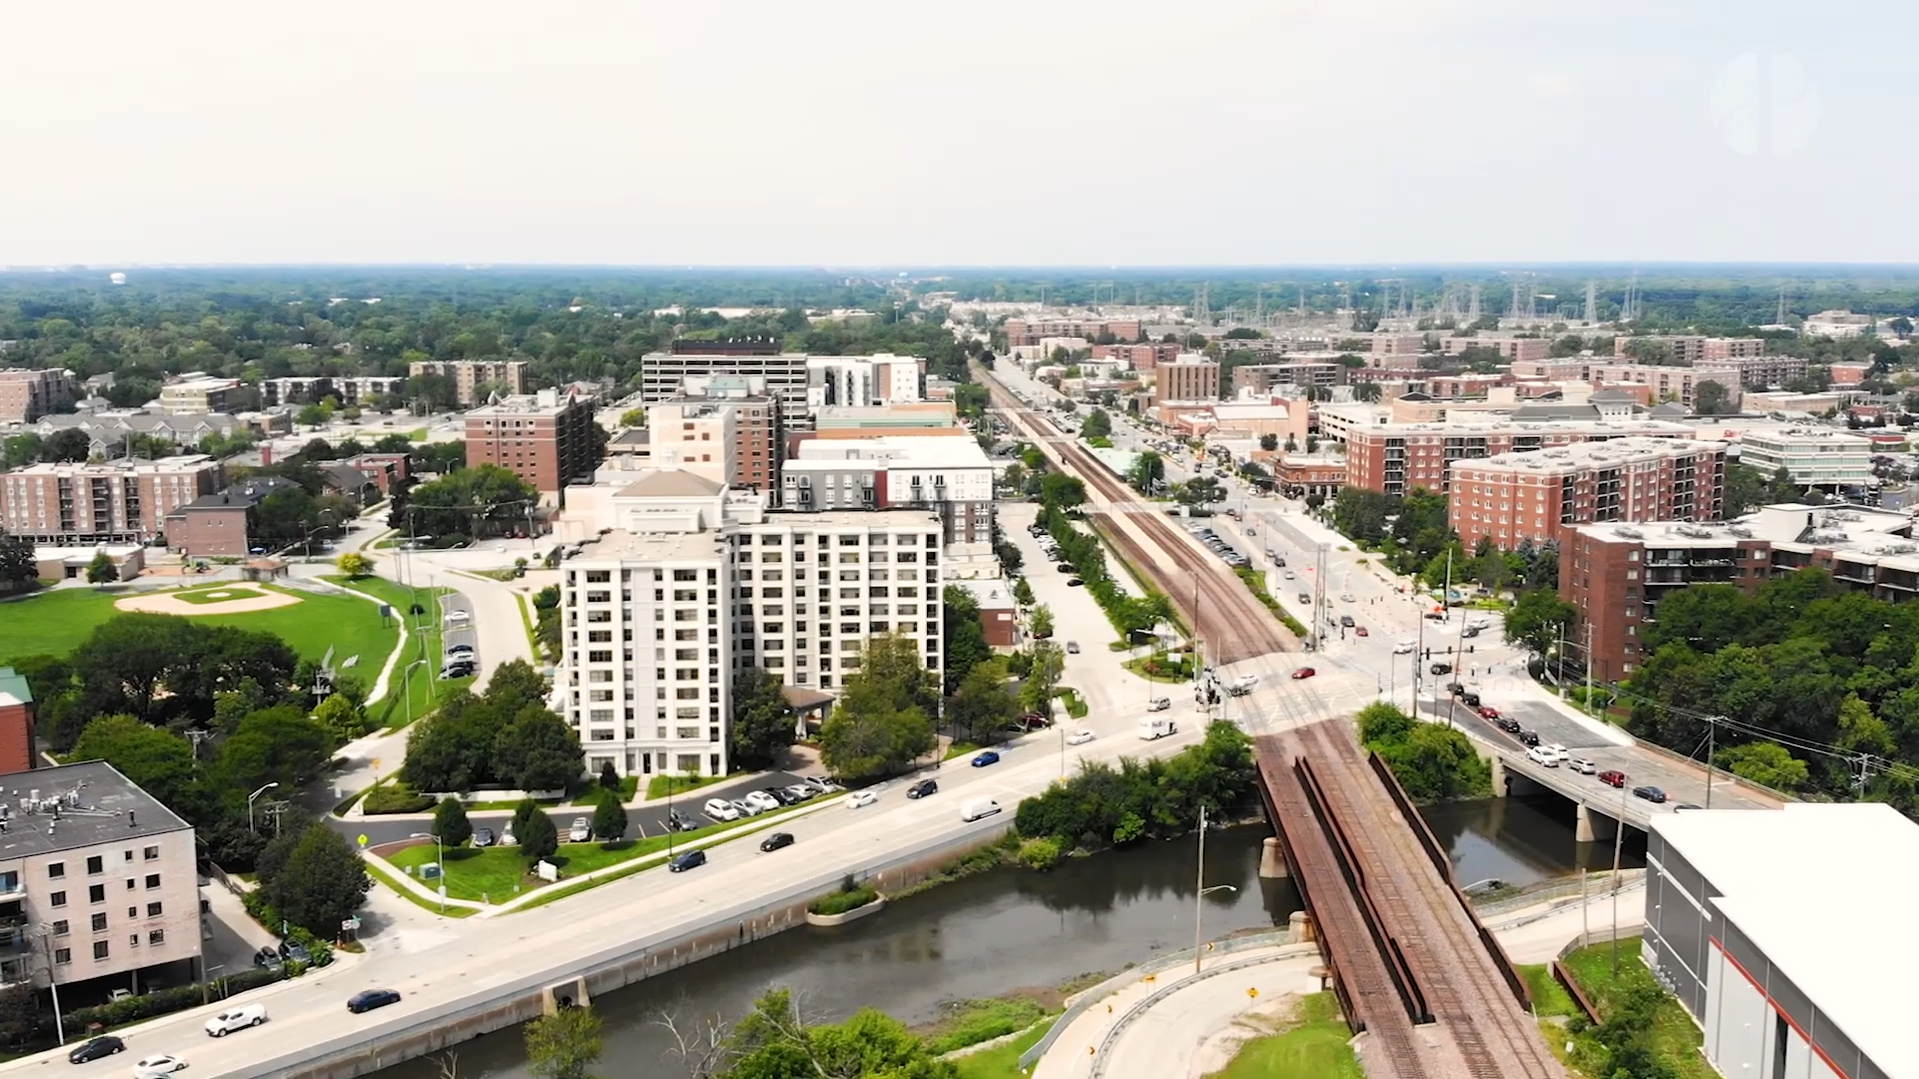 Envisioning the Future of Des Plaines